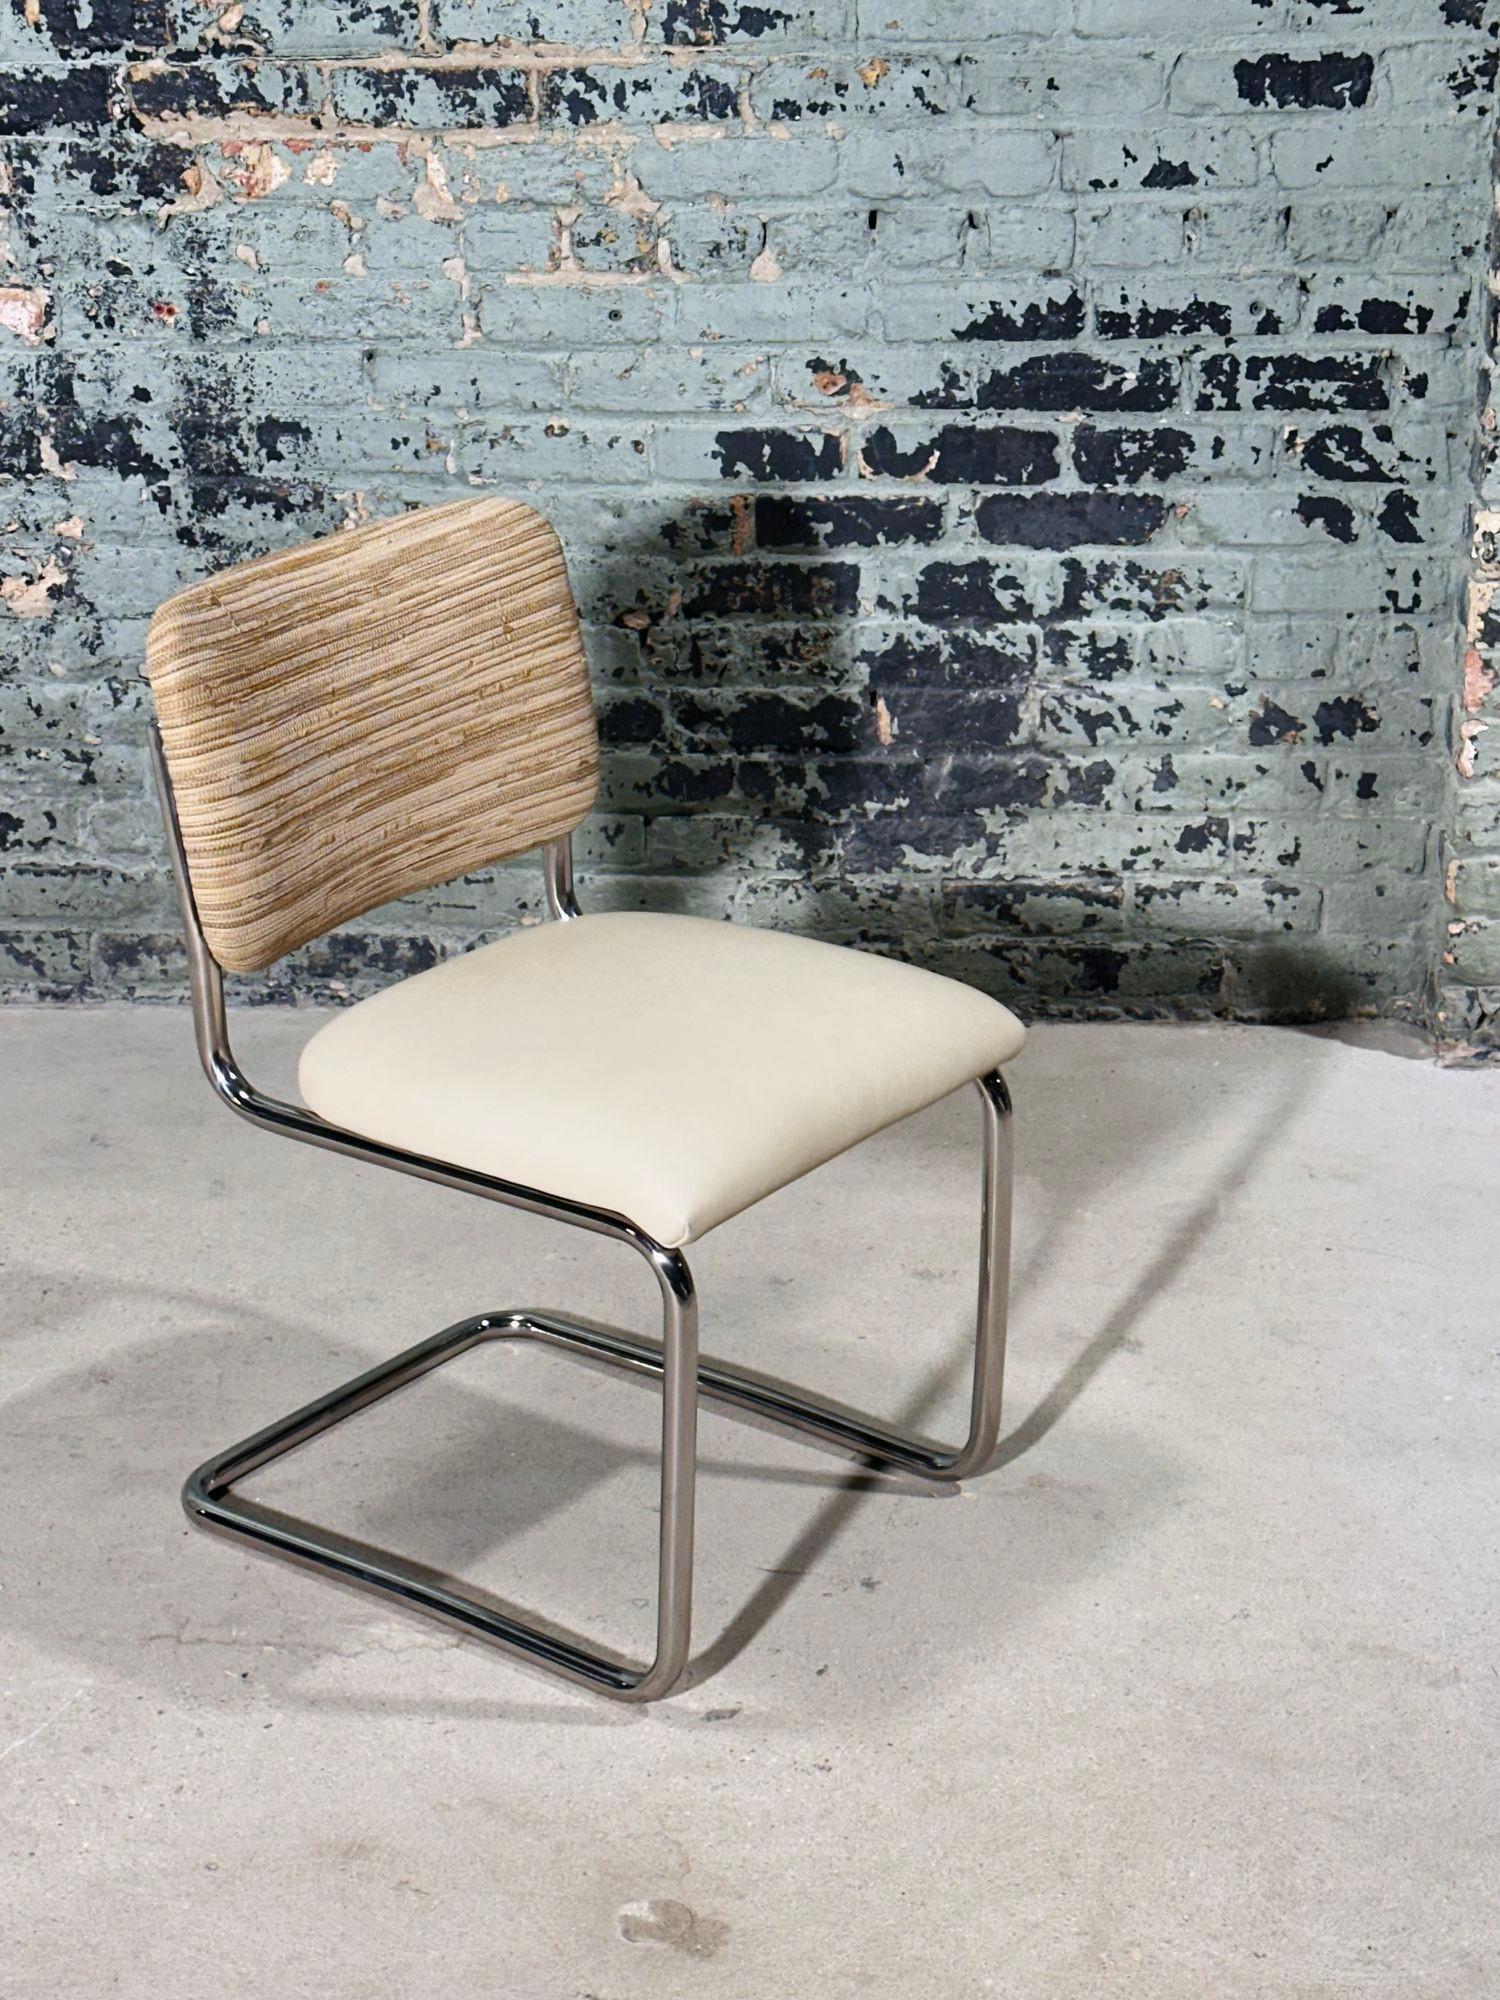 8 Marcel Breuer Cesca Side/Dining Chairs for Knoll, 1980. Woven leather upholstered backs in the style of Bottega Veneta, seat cushions are supple cream colored leather.
Measure 31